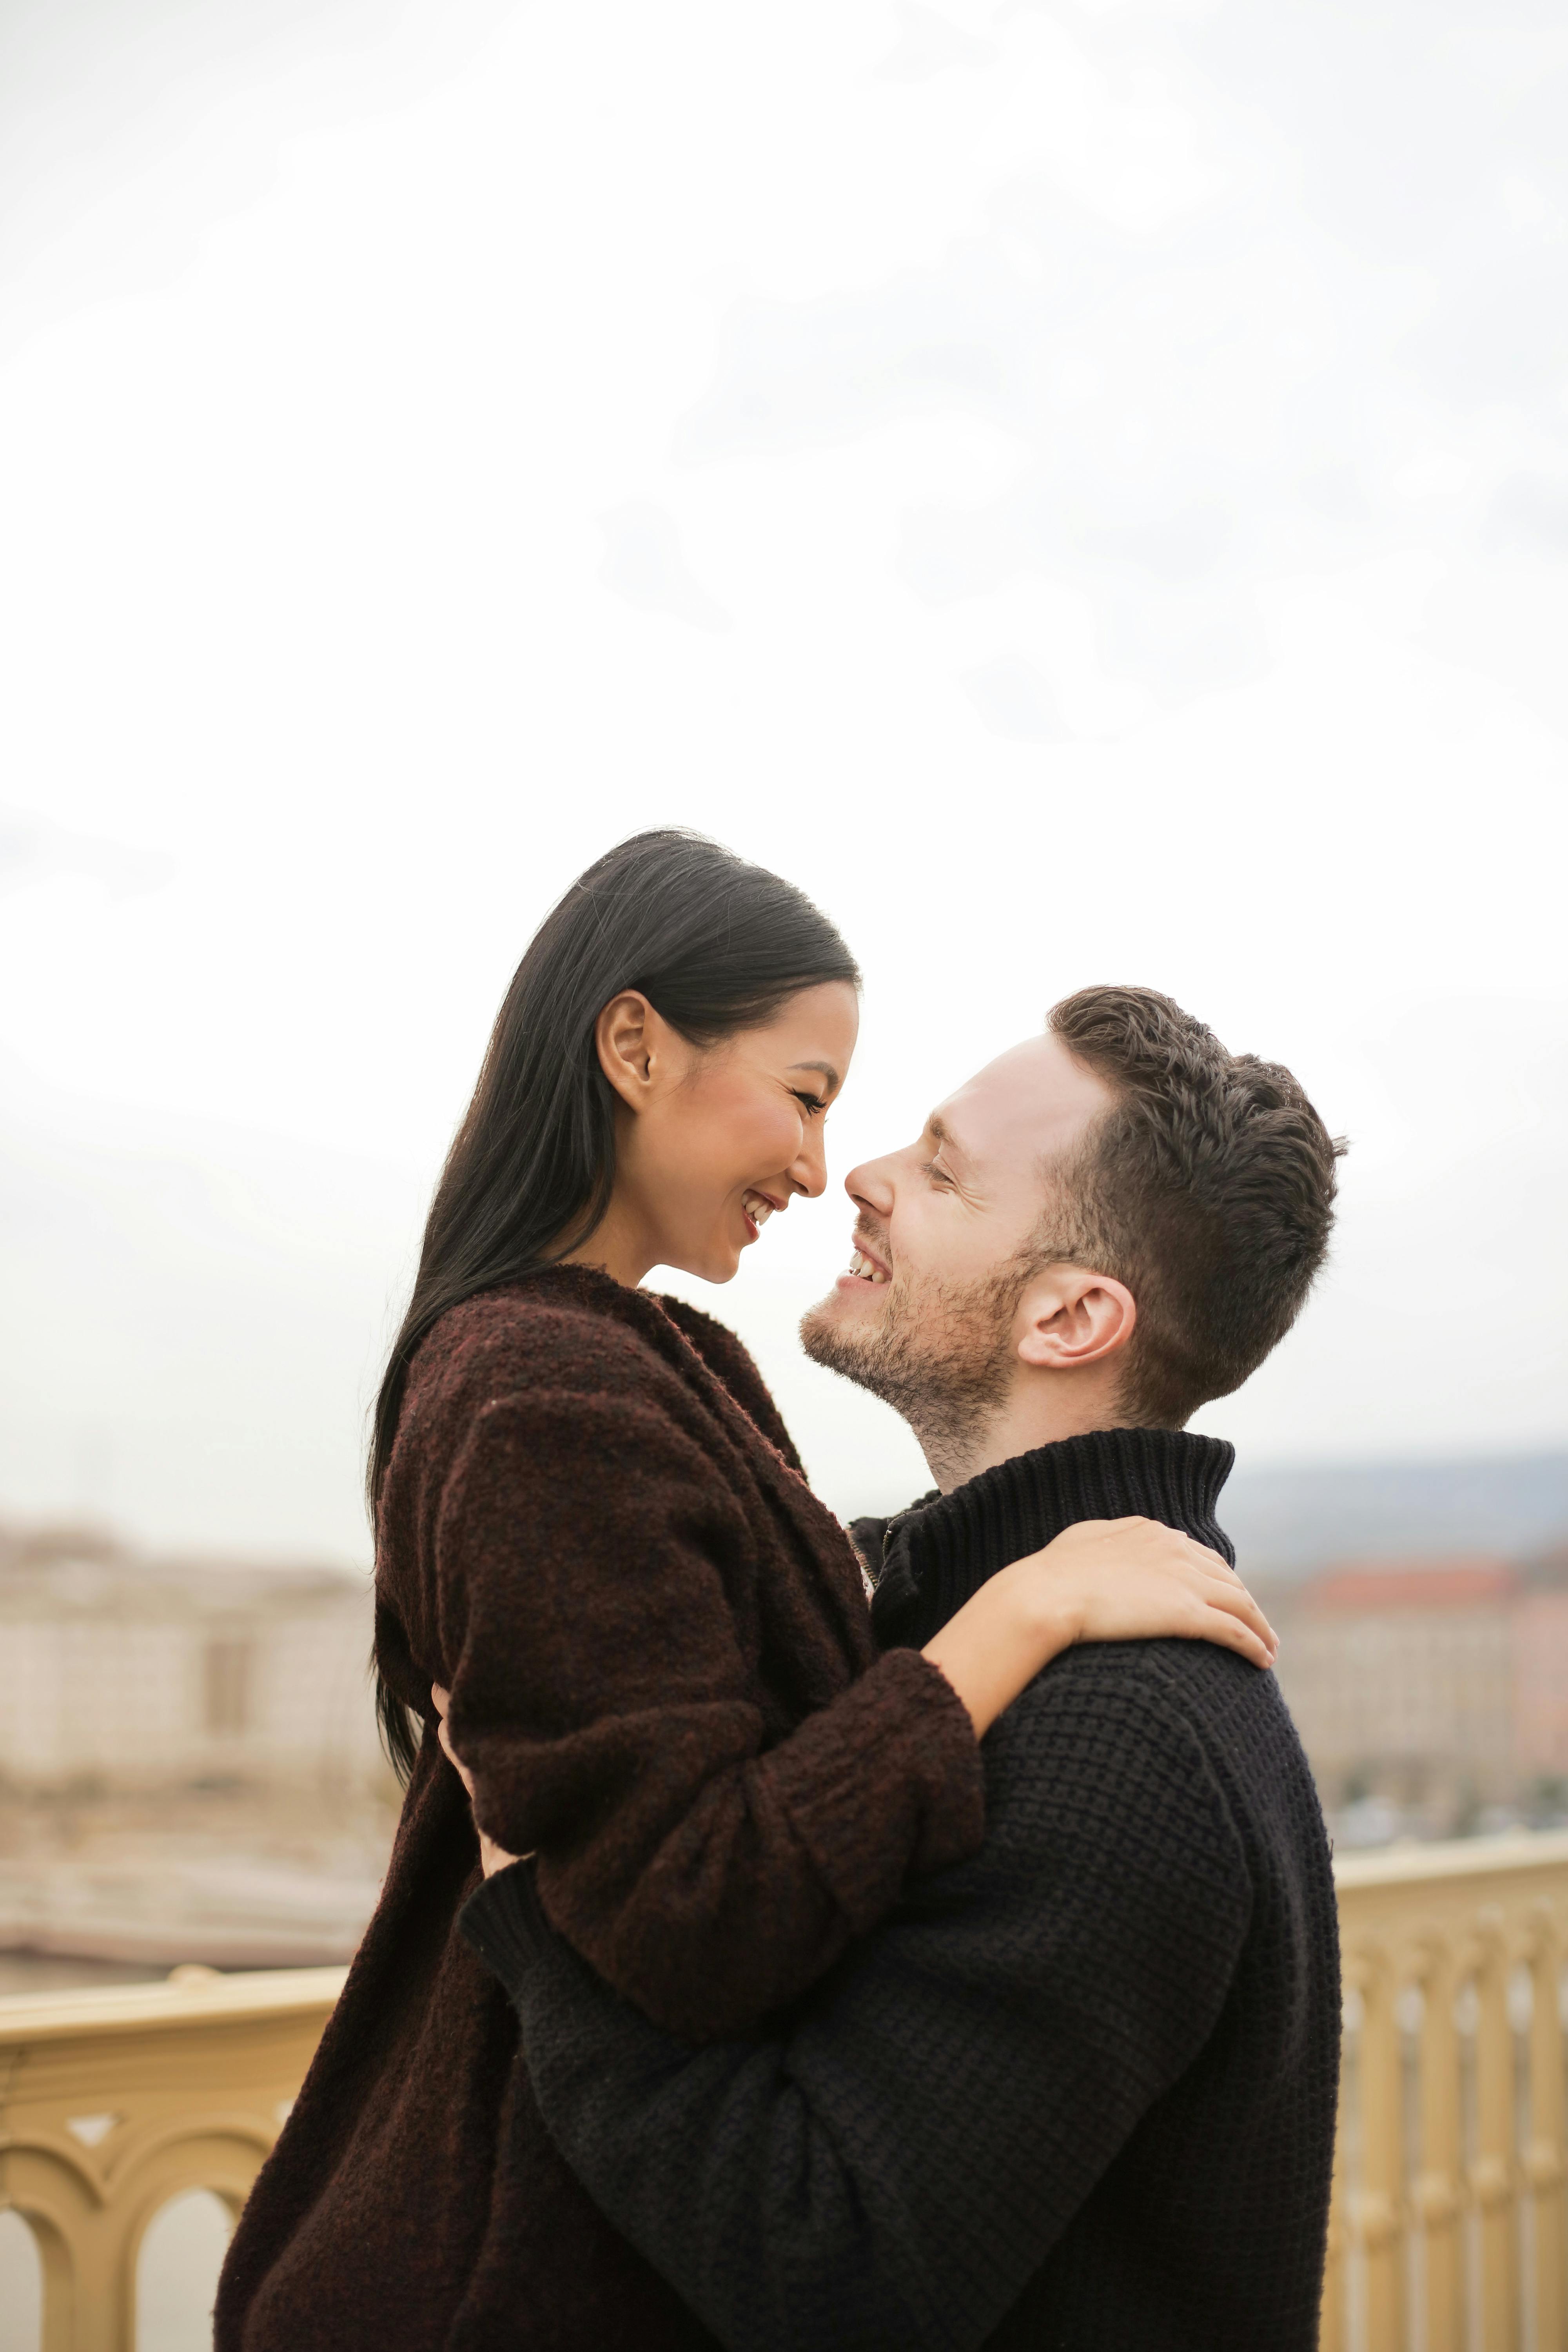 Happy couple on a rooftop | Source: Pexels